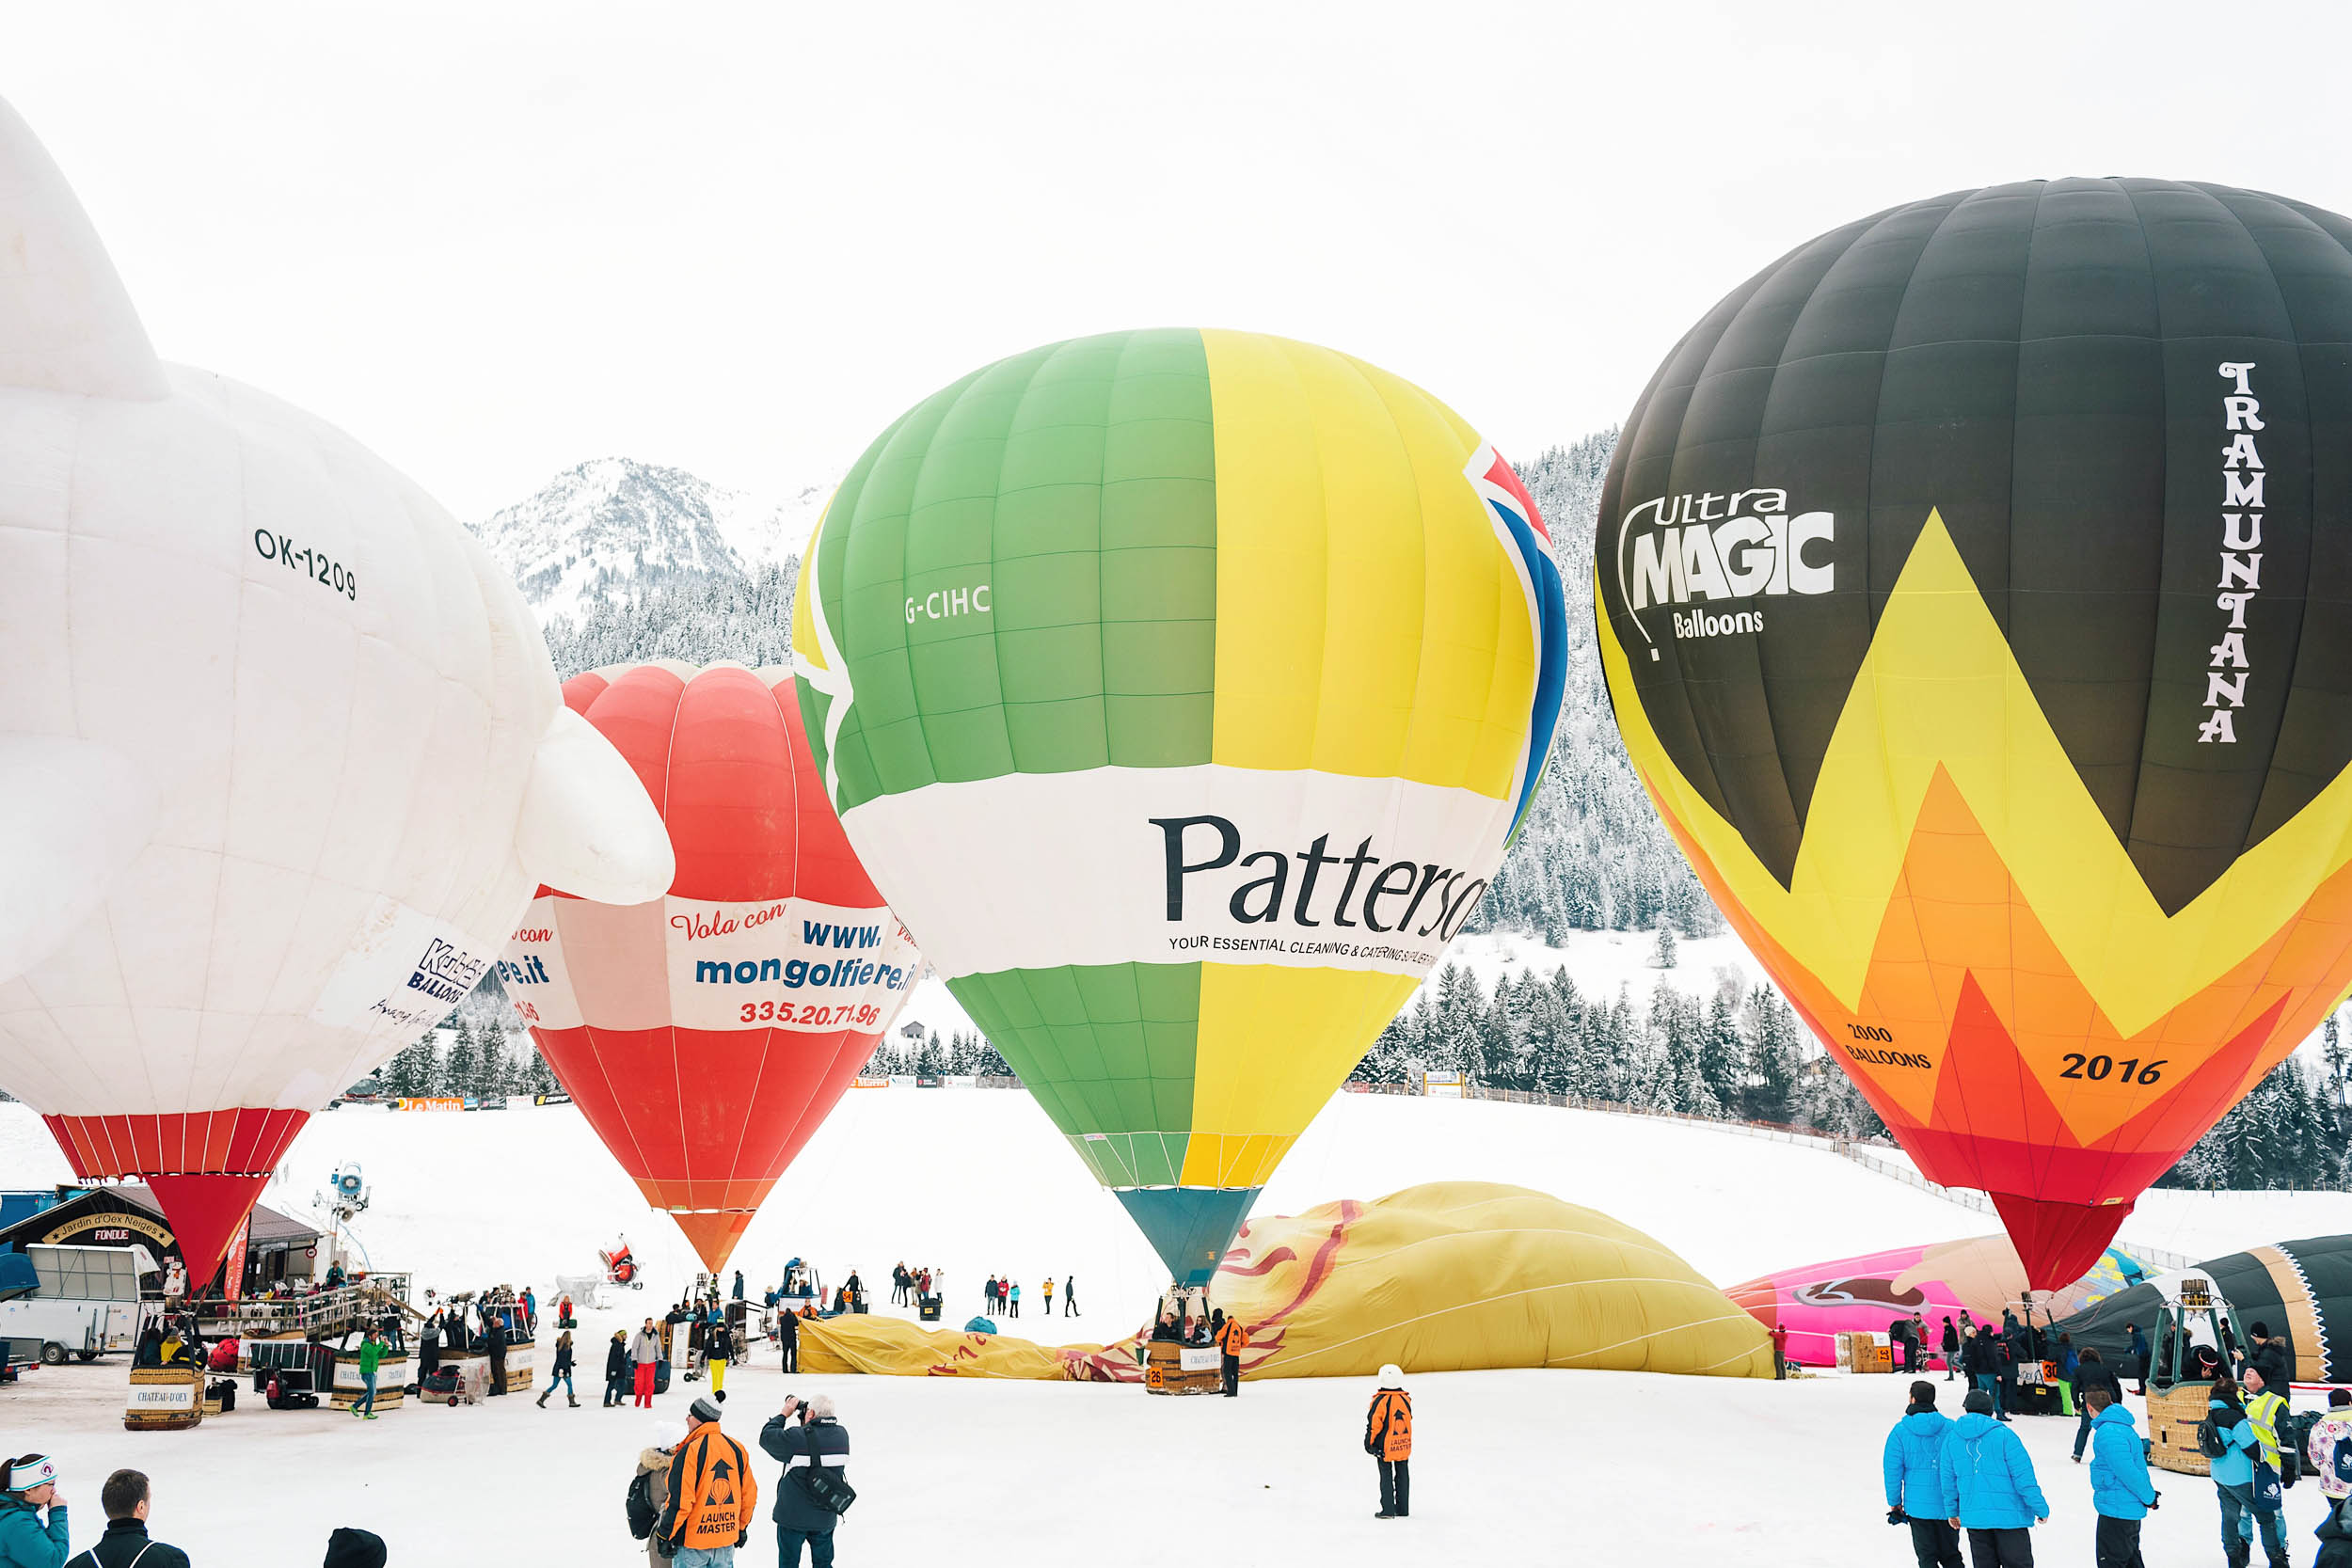 This year marked the 40th International Hot Air Balloon Festival of Chateau d'Oex, Switzerland